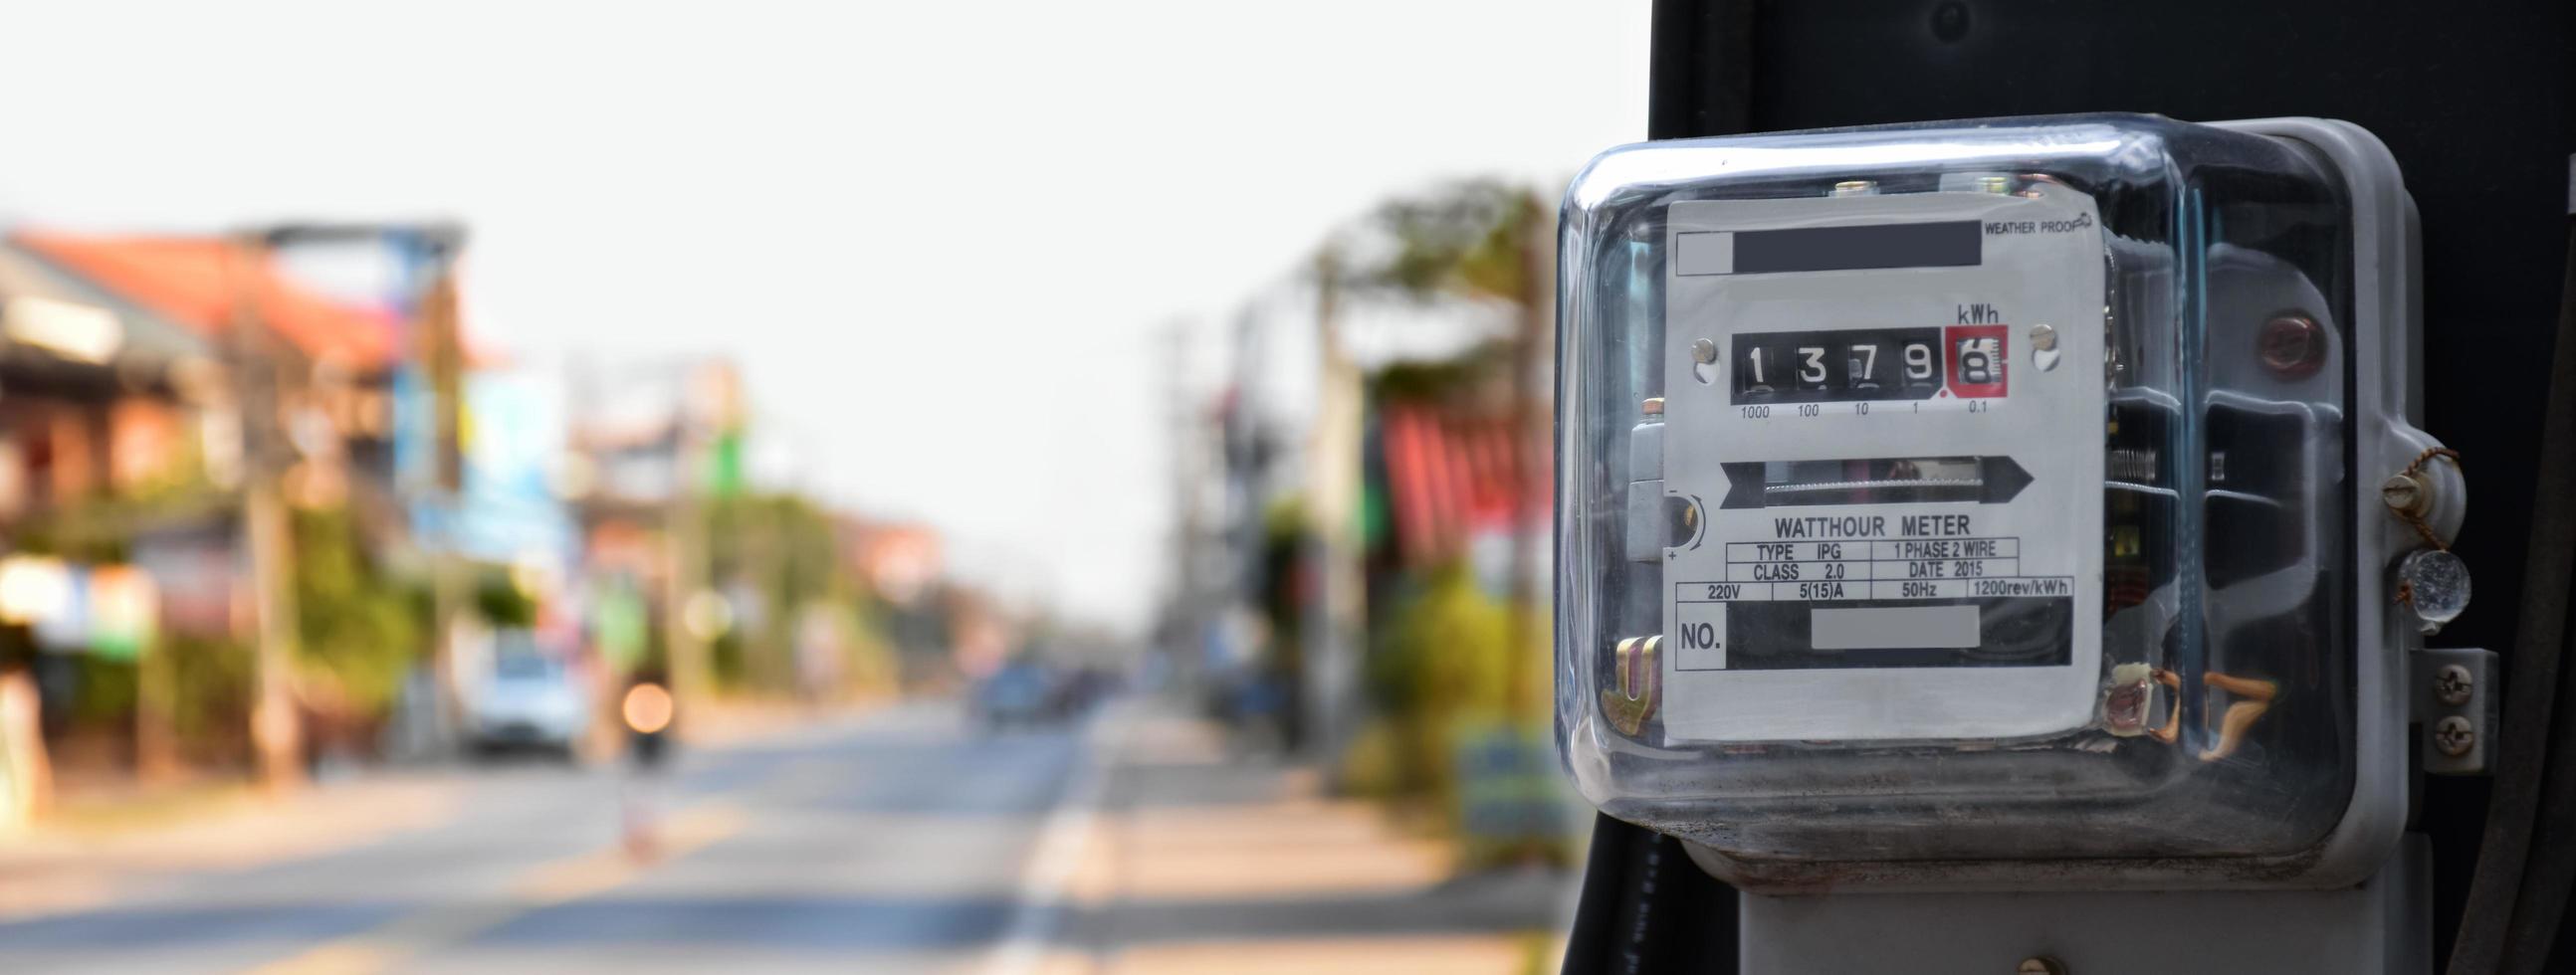 Watthour meter or electricity meter on pole to record the monthly electricity consumption of the inhabitants of each houses in the Southeast Asian countries, soft and selective focus on meter. photo